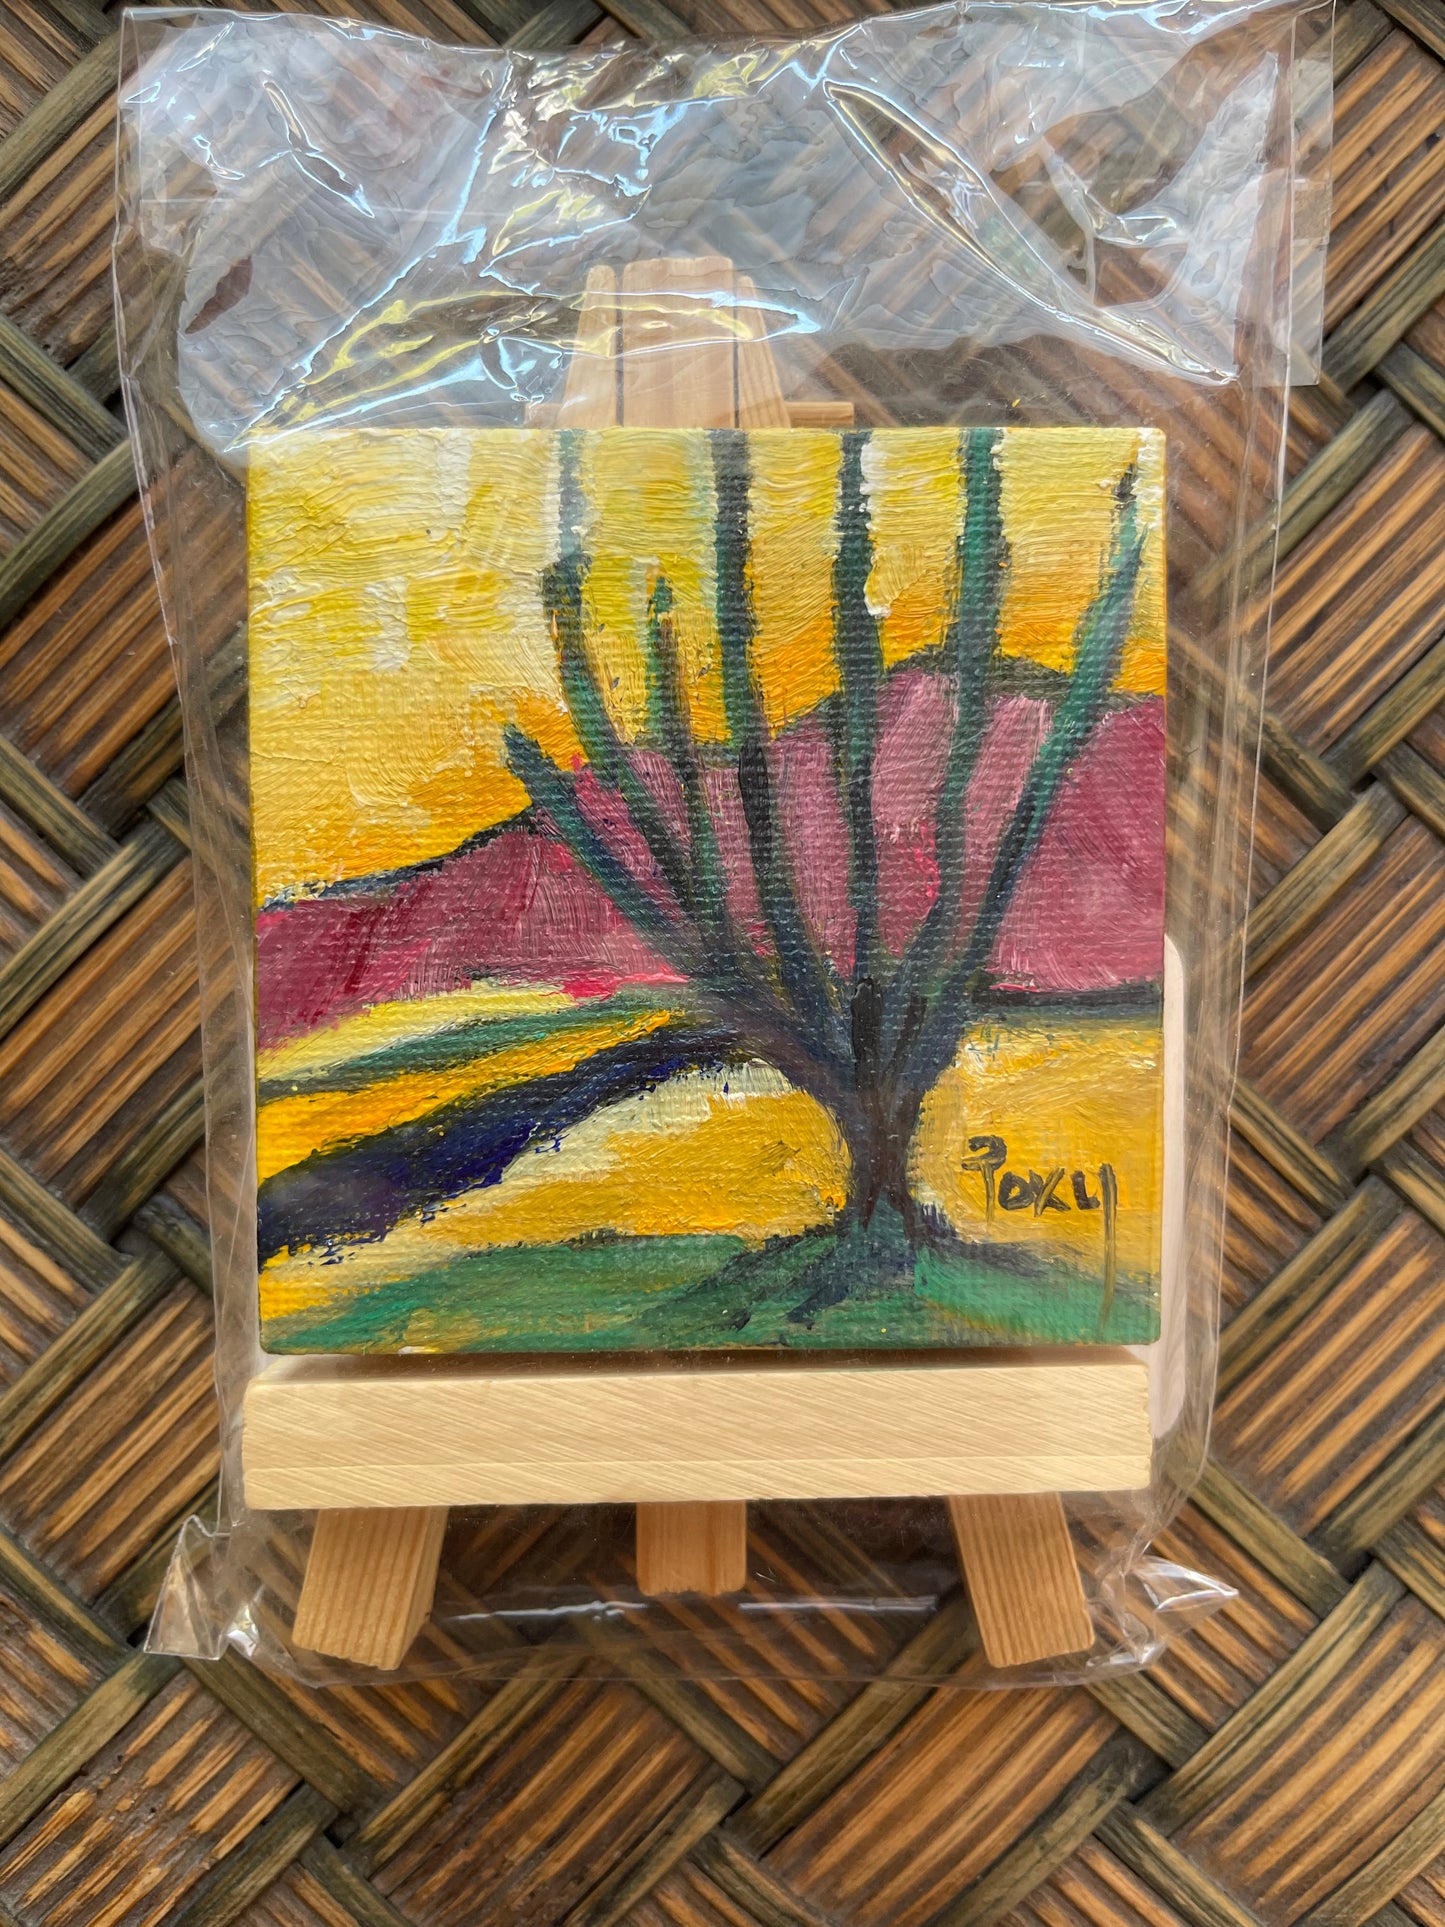 Bright Southwestern Landscape-Original Miniature Oil Painting with Stand